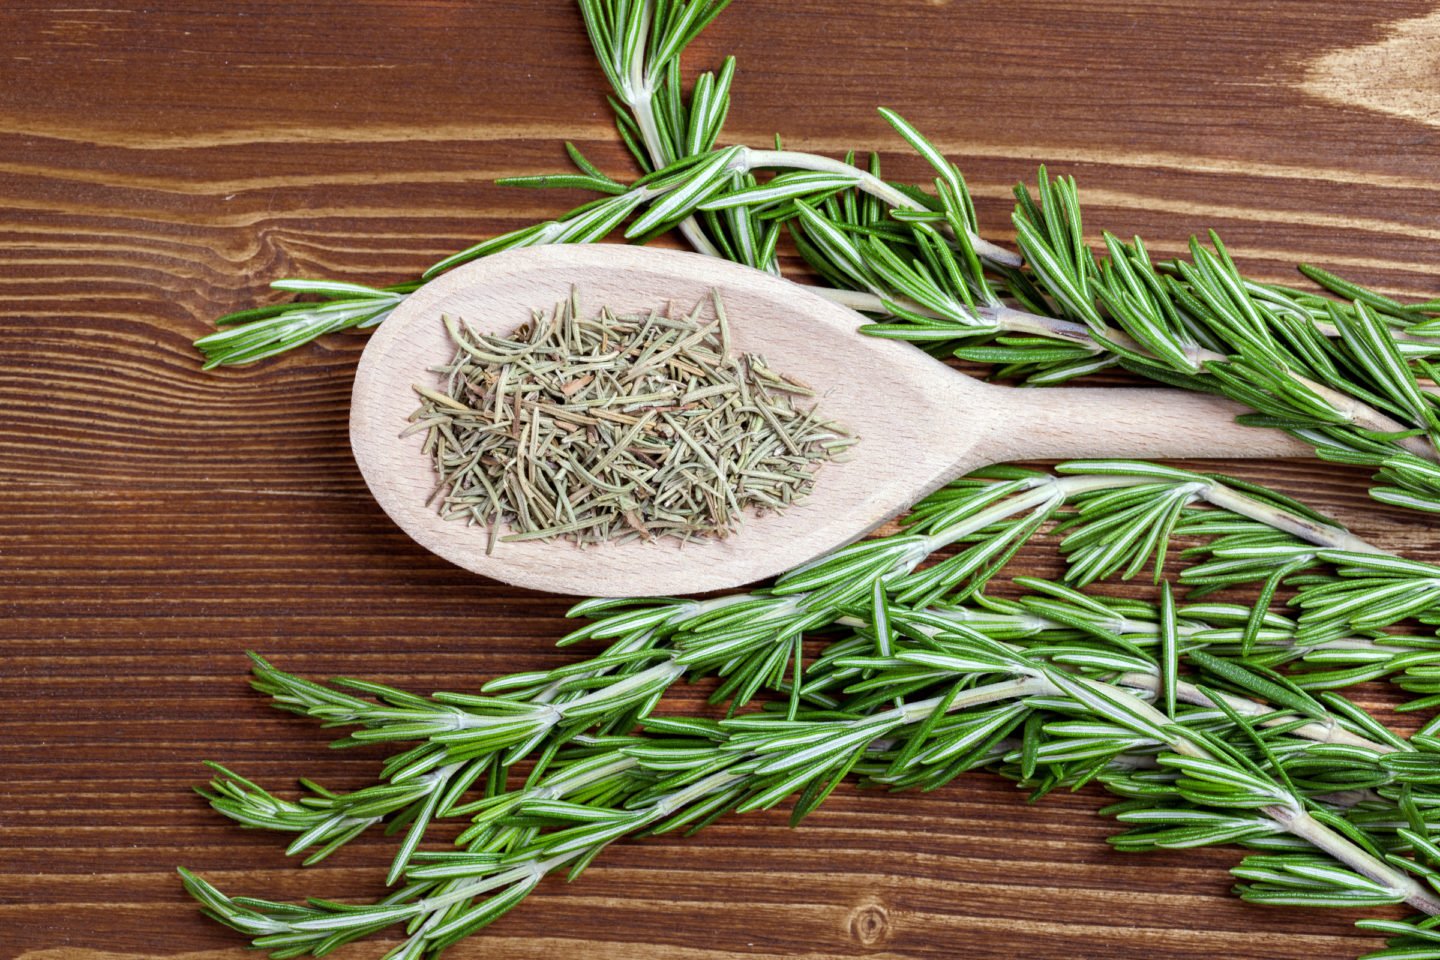 rosemary is a good thyme substitute